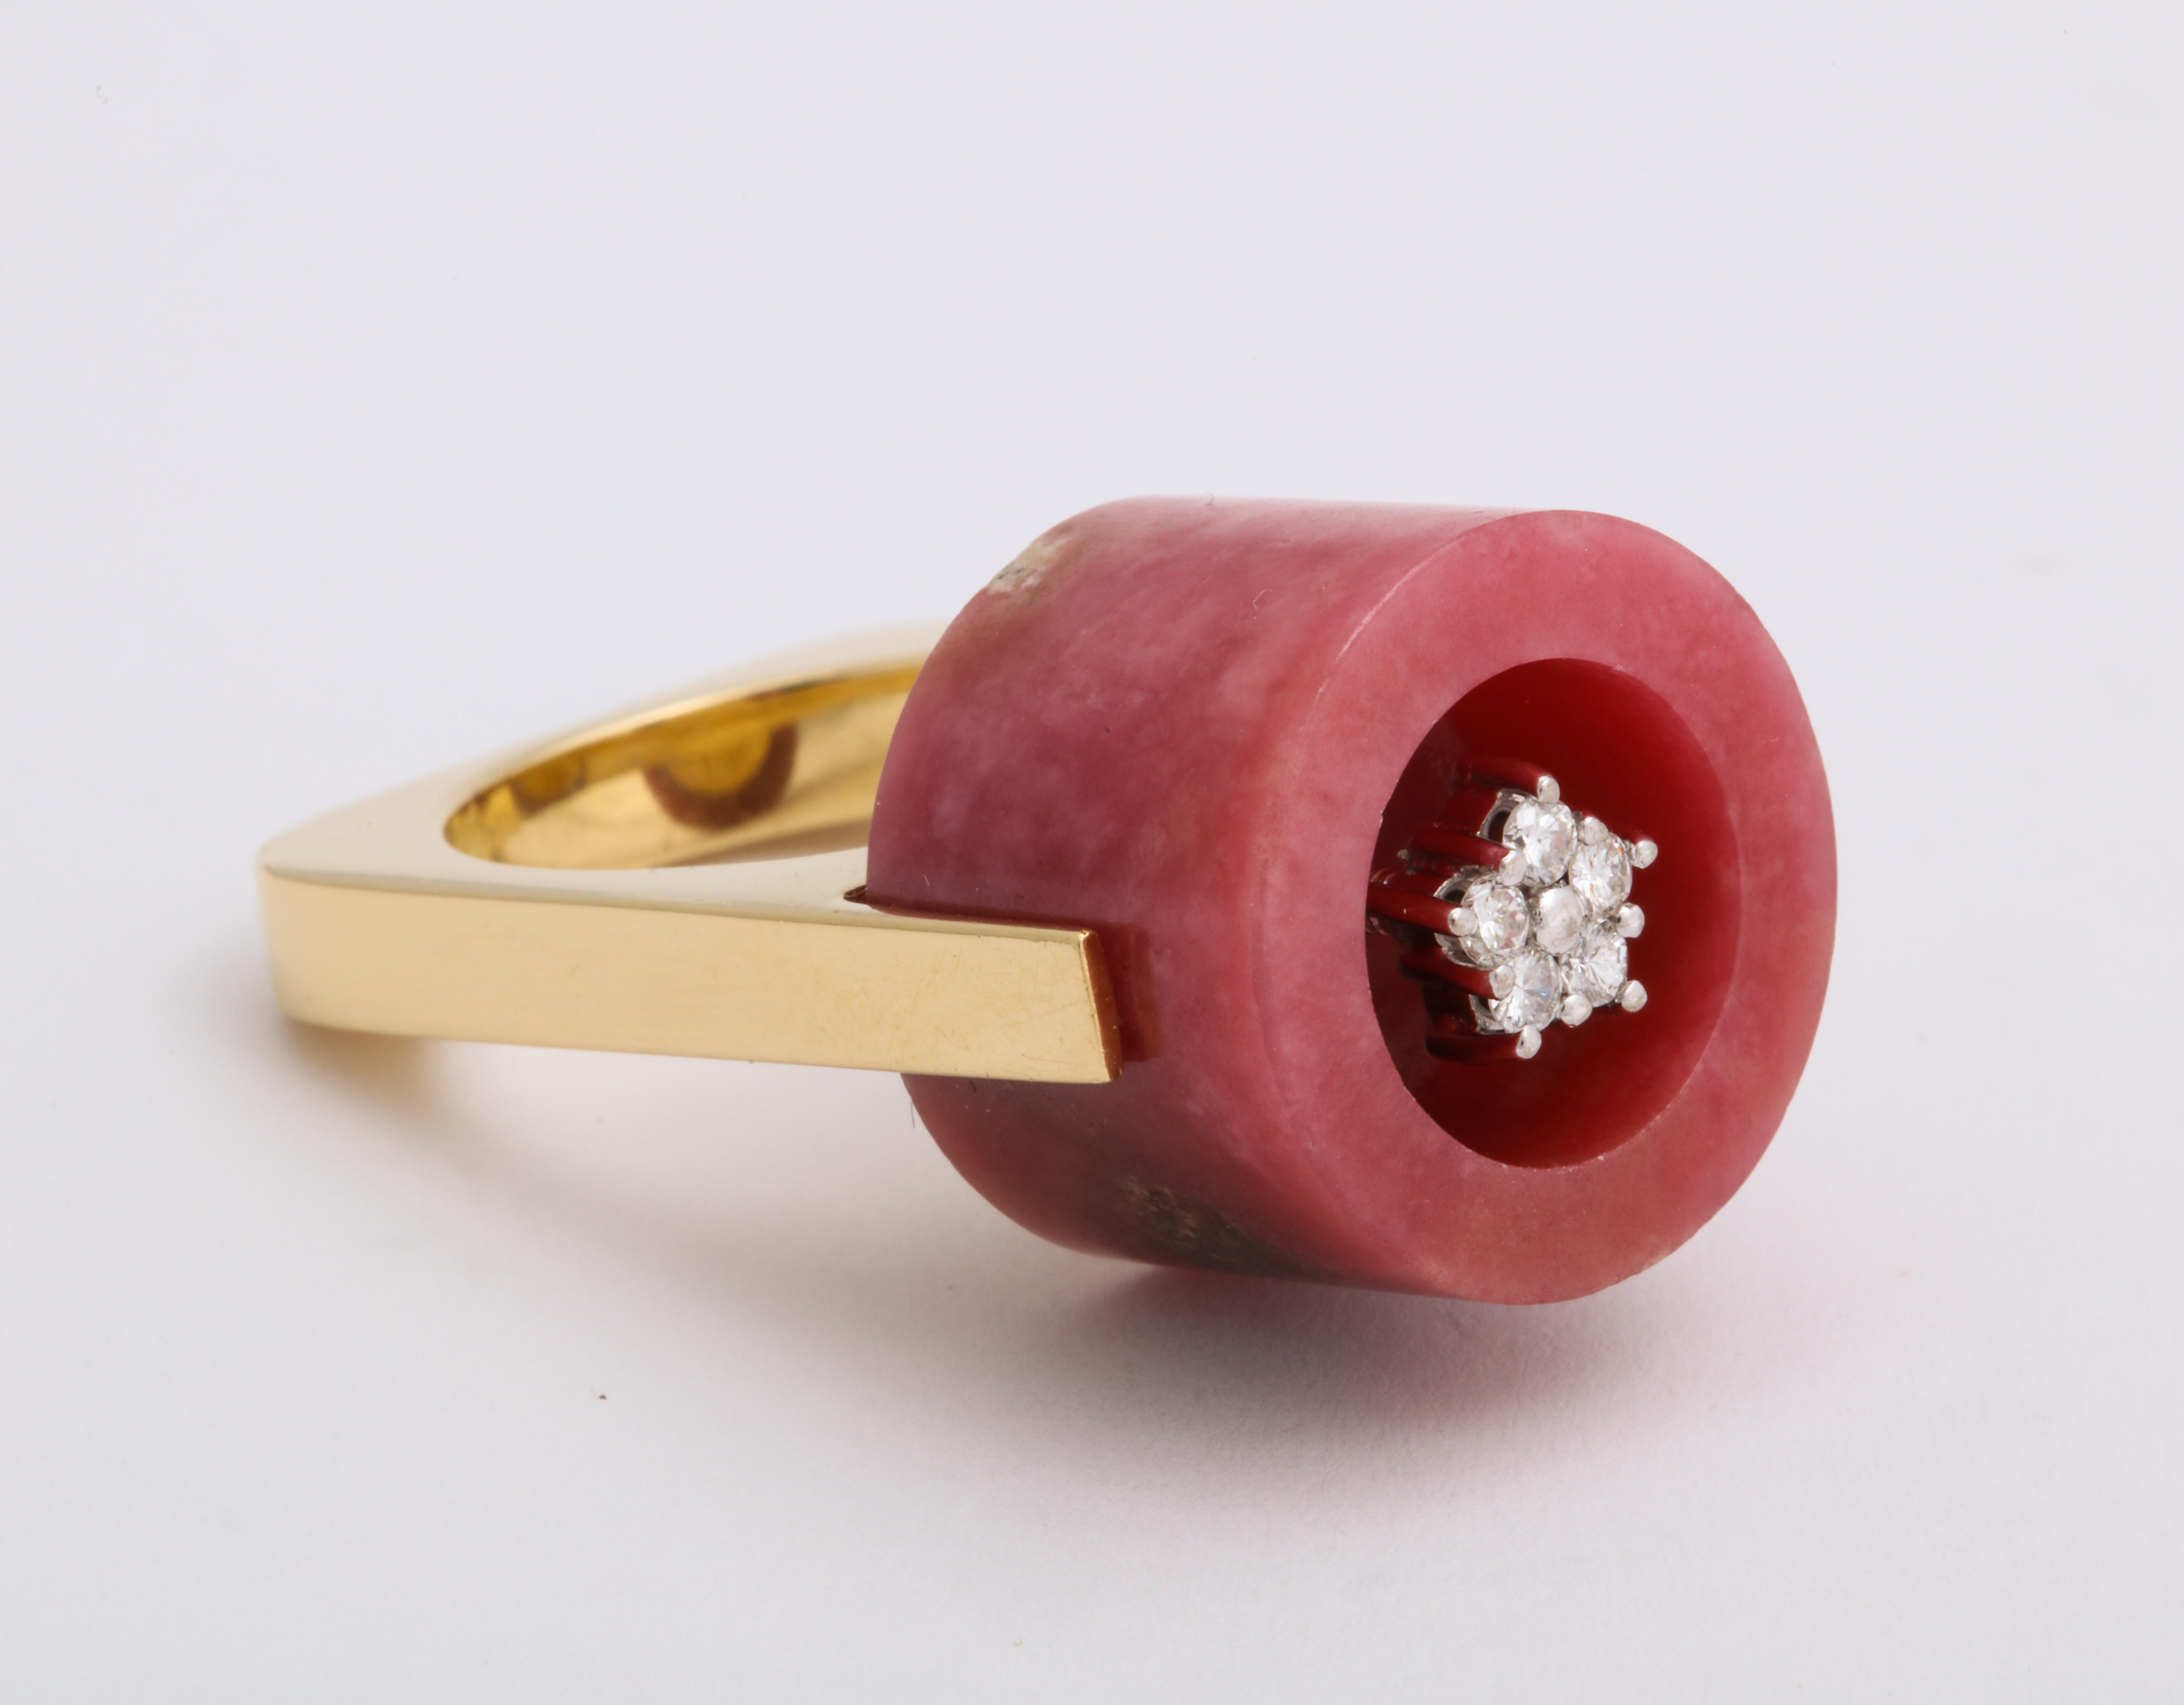 This Rhodonite barrel cut gemstone forms a cave-like home for a tiny cluster of round brilliant diamonds.  The artfully carved gemstone is set into a geometric solid 18K yellow gold ring that looks like it took a few spins on the Studio 54 dance